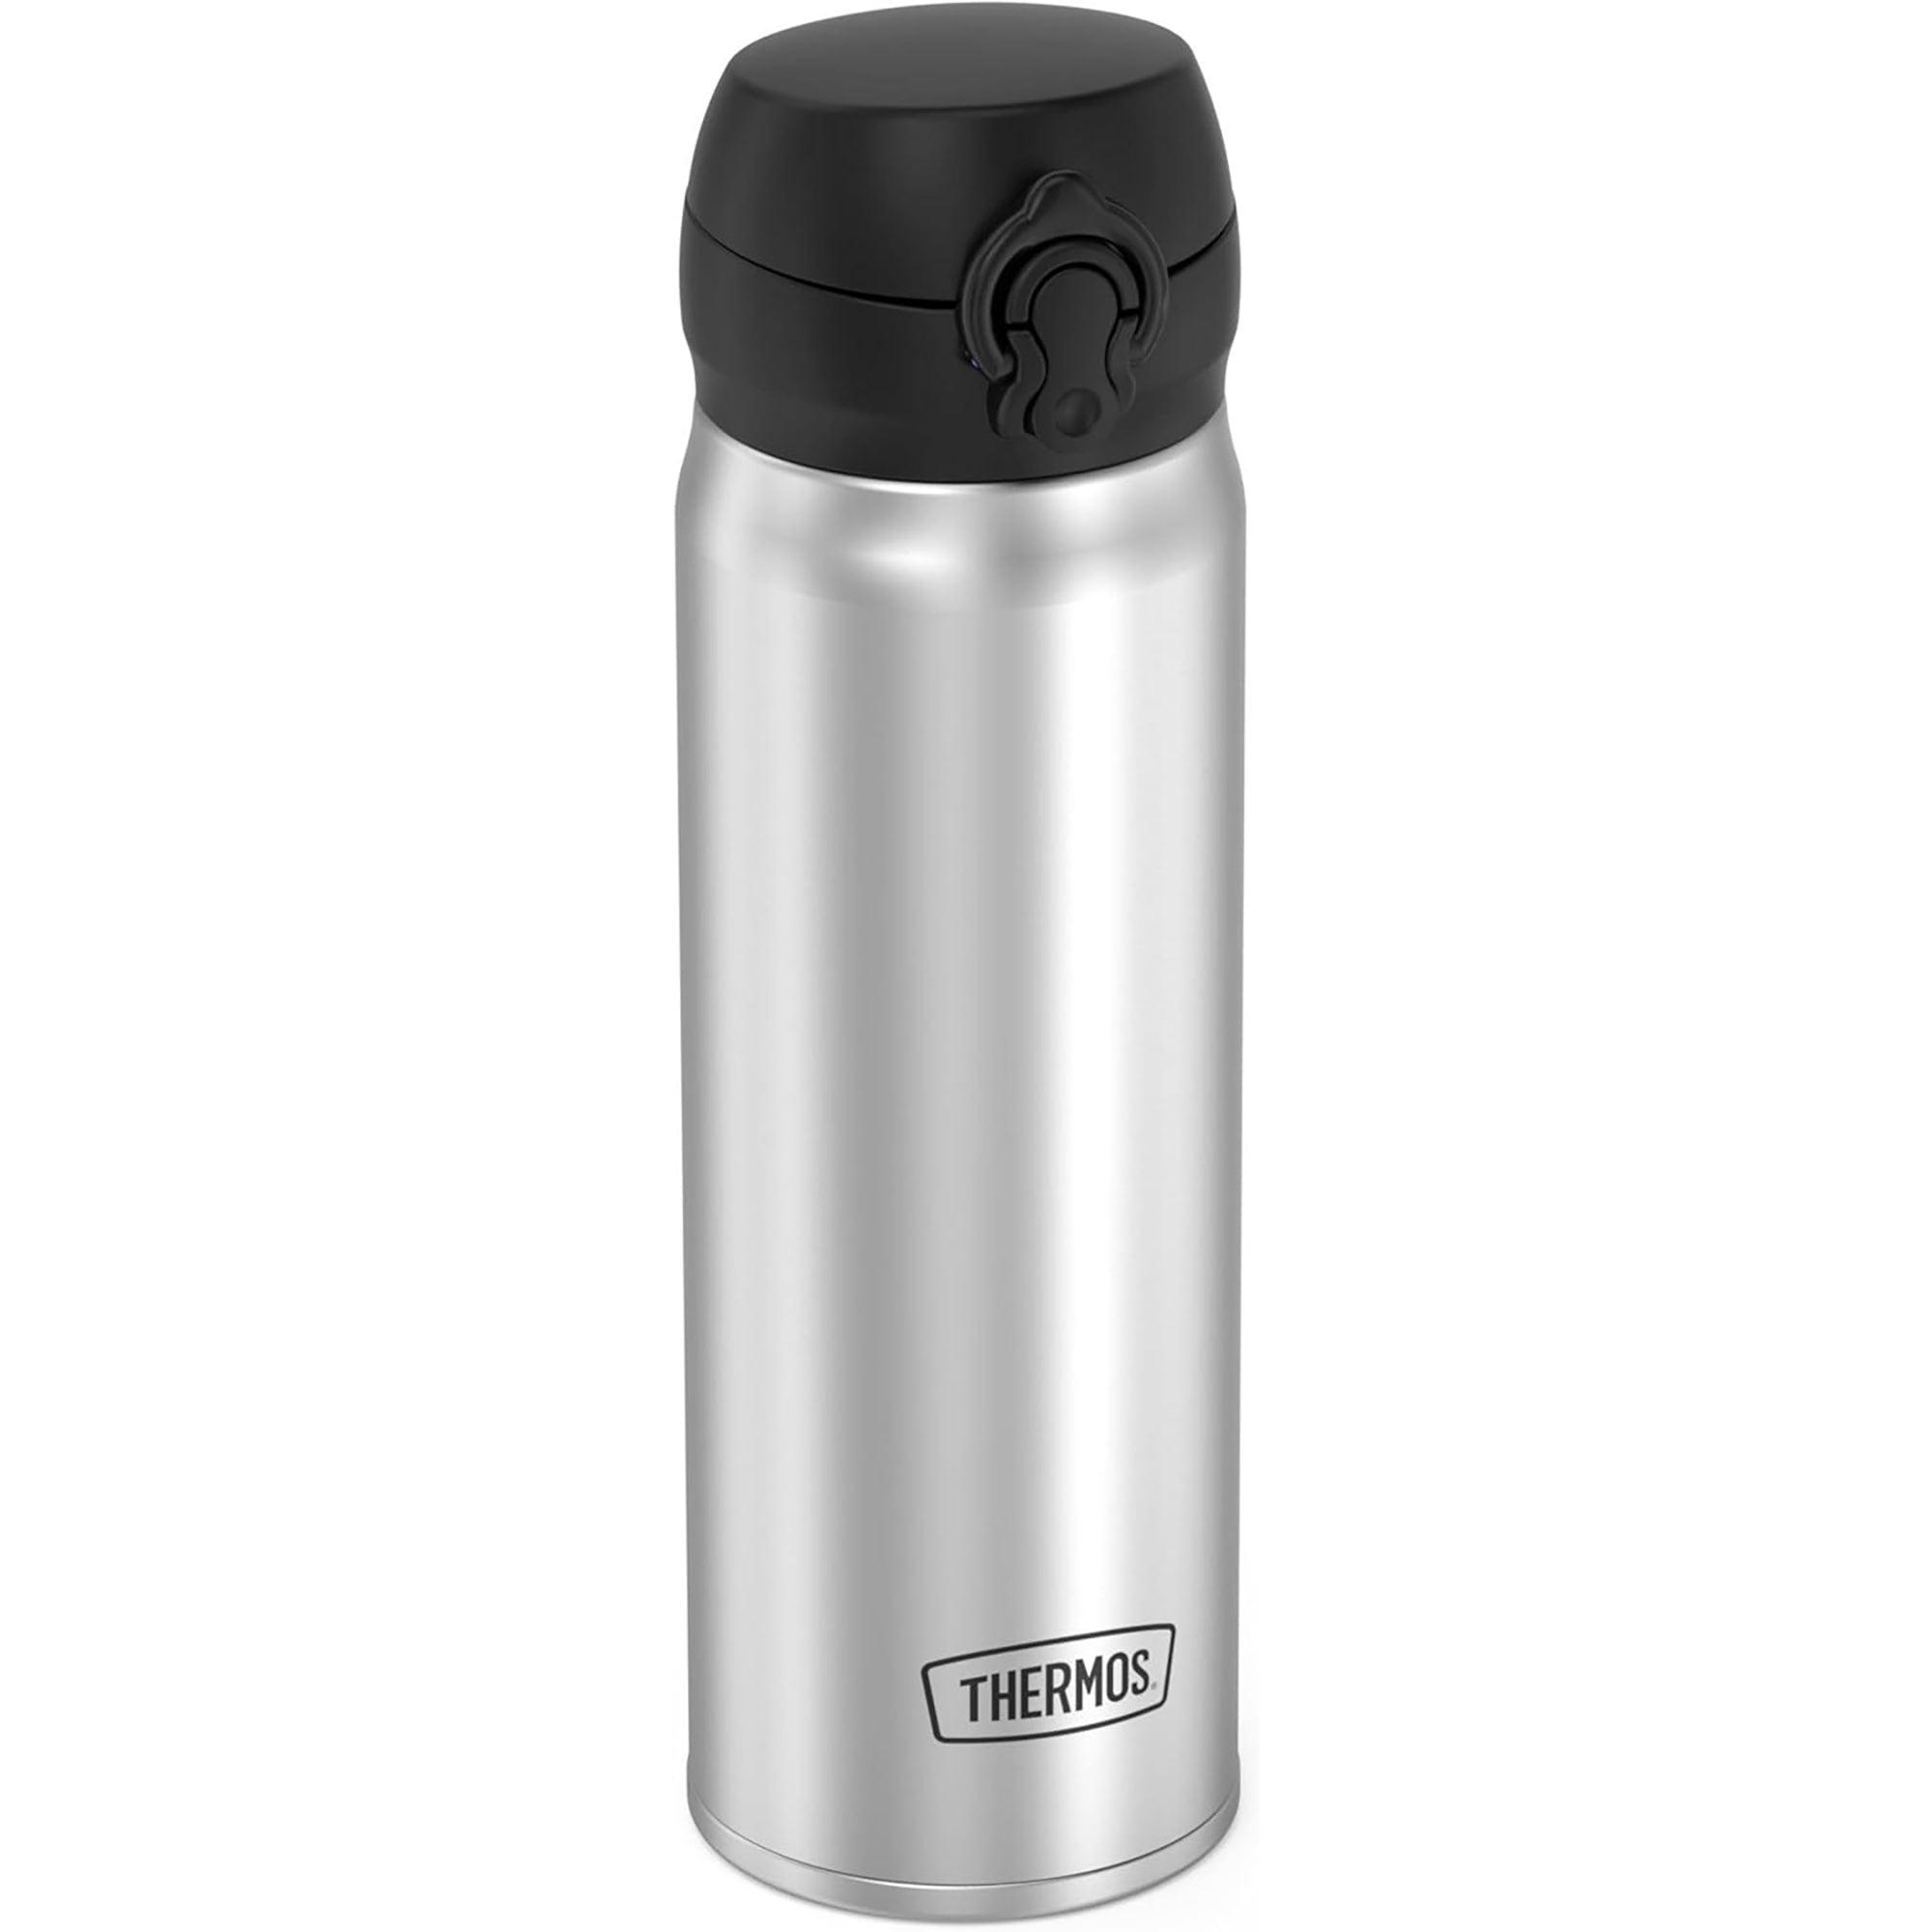 ALTA SERIES BY THERMOS Stainless Steel Direct Drink Bottle, 16 Ounce,  Espresso Black